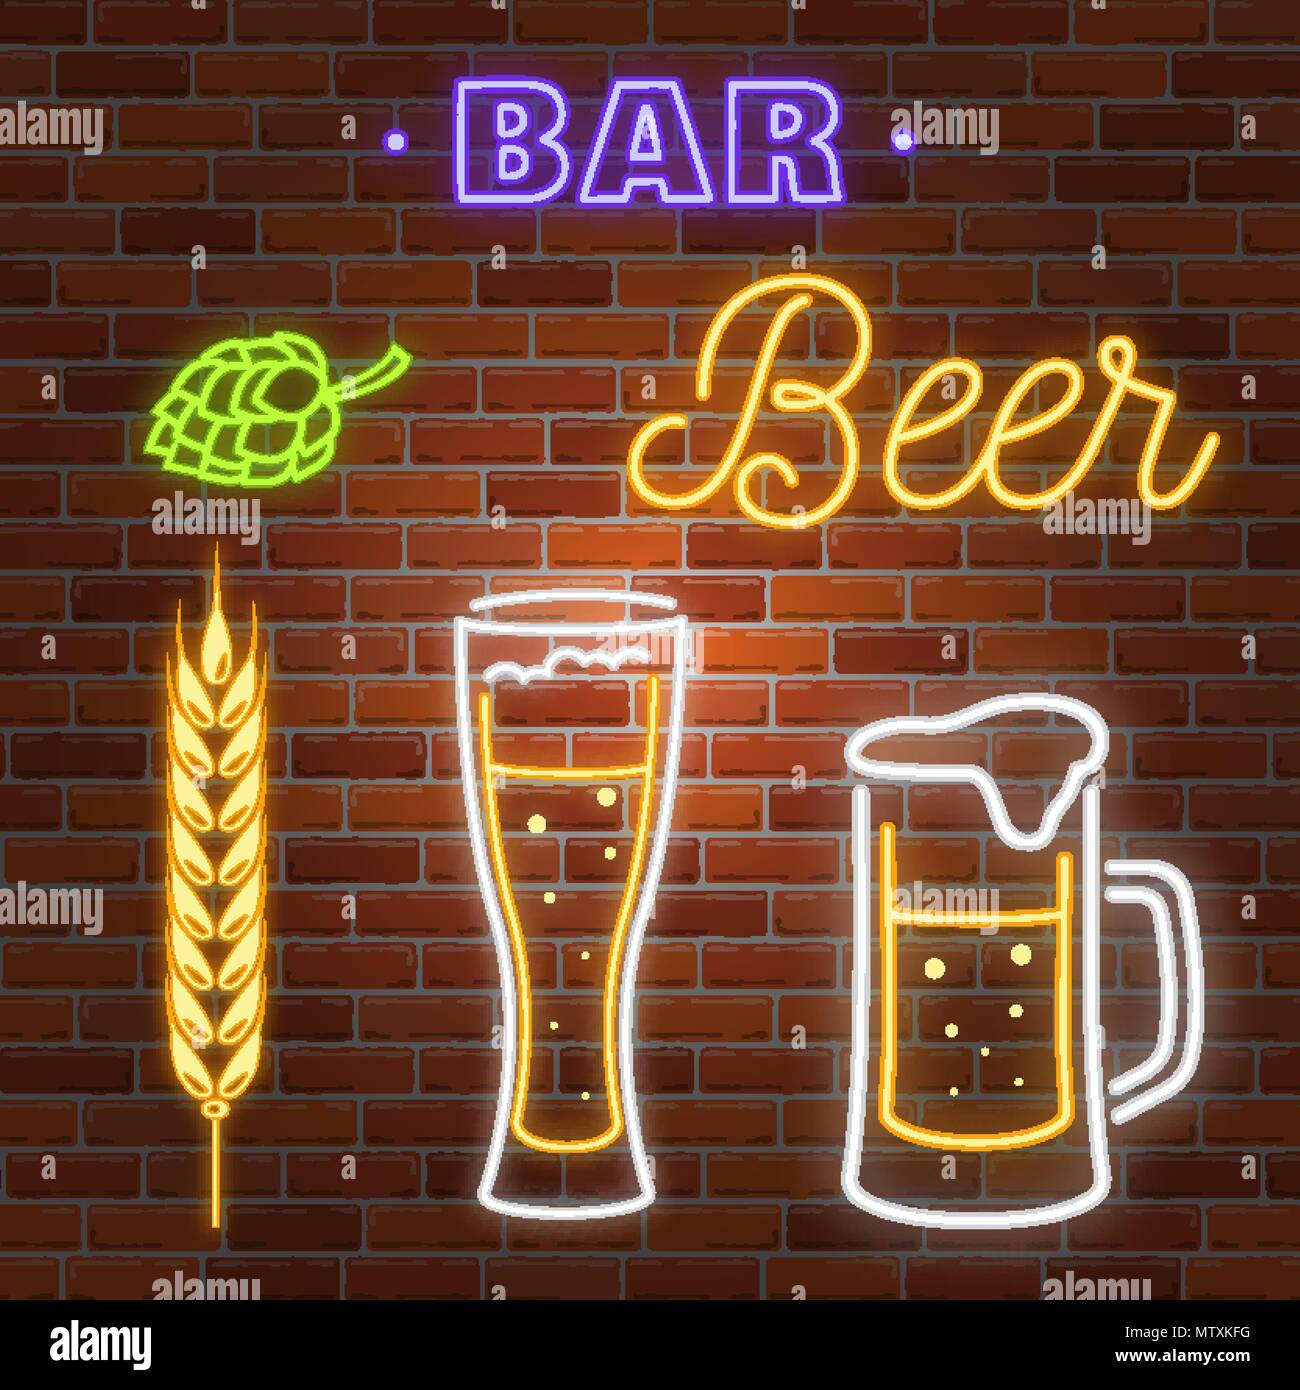 Set of neon Beer Bar sign on brick wall background. Vector illustration. Stock Vector